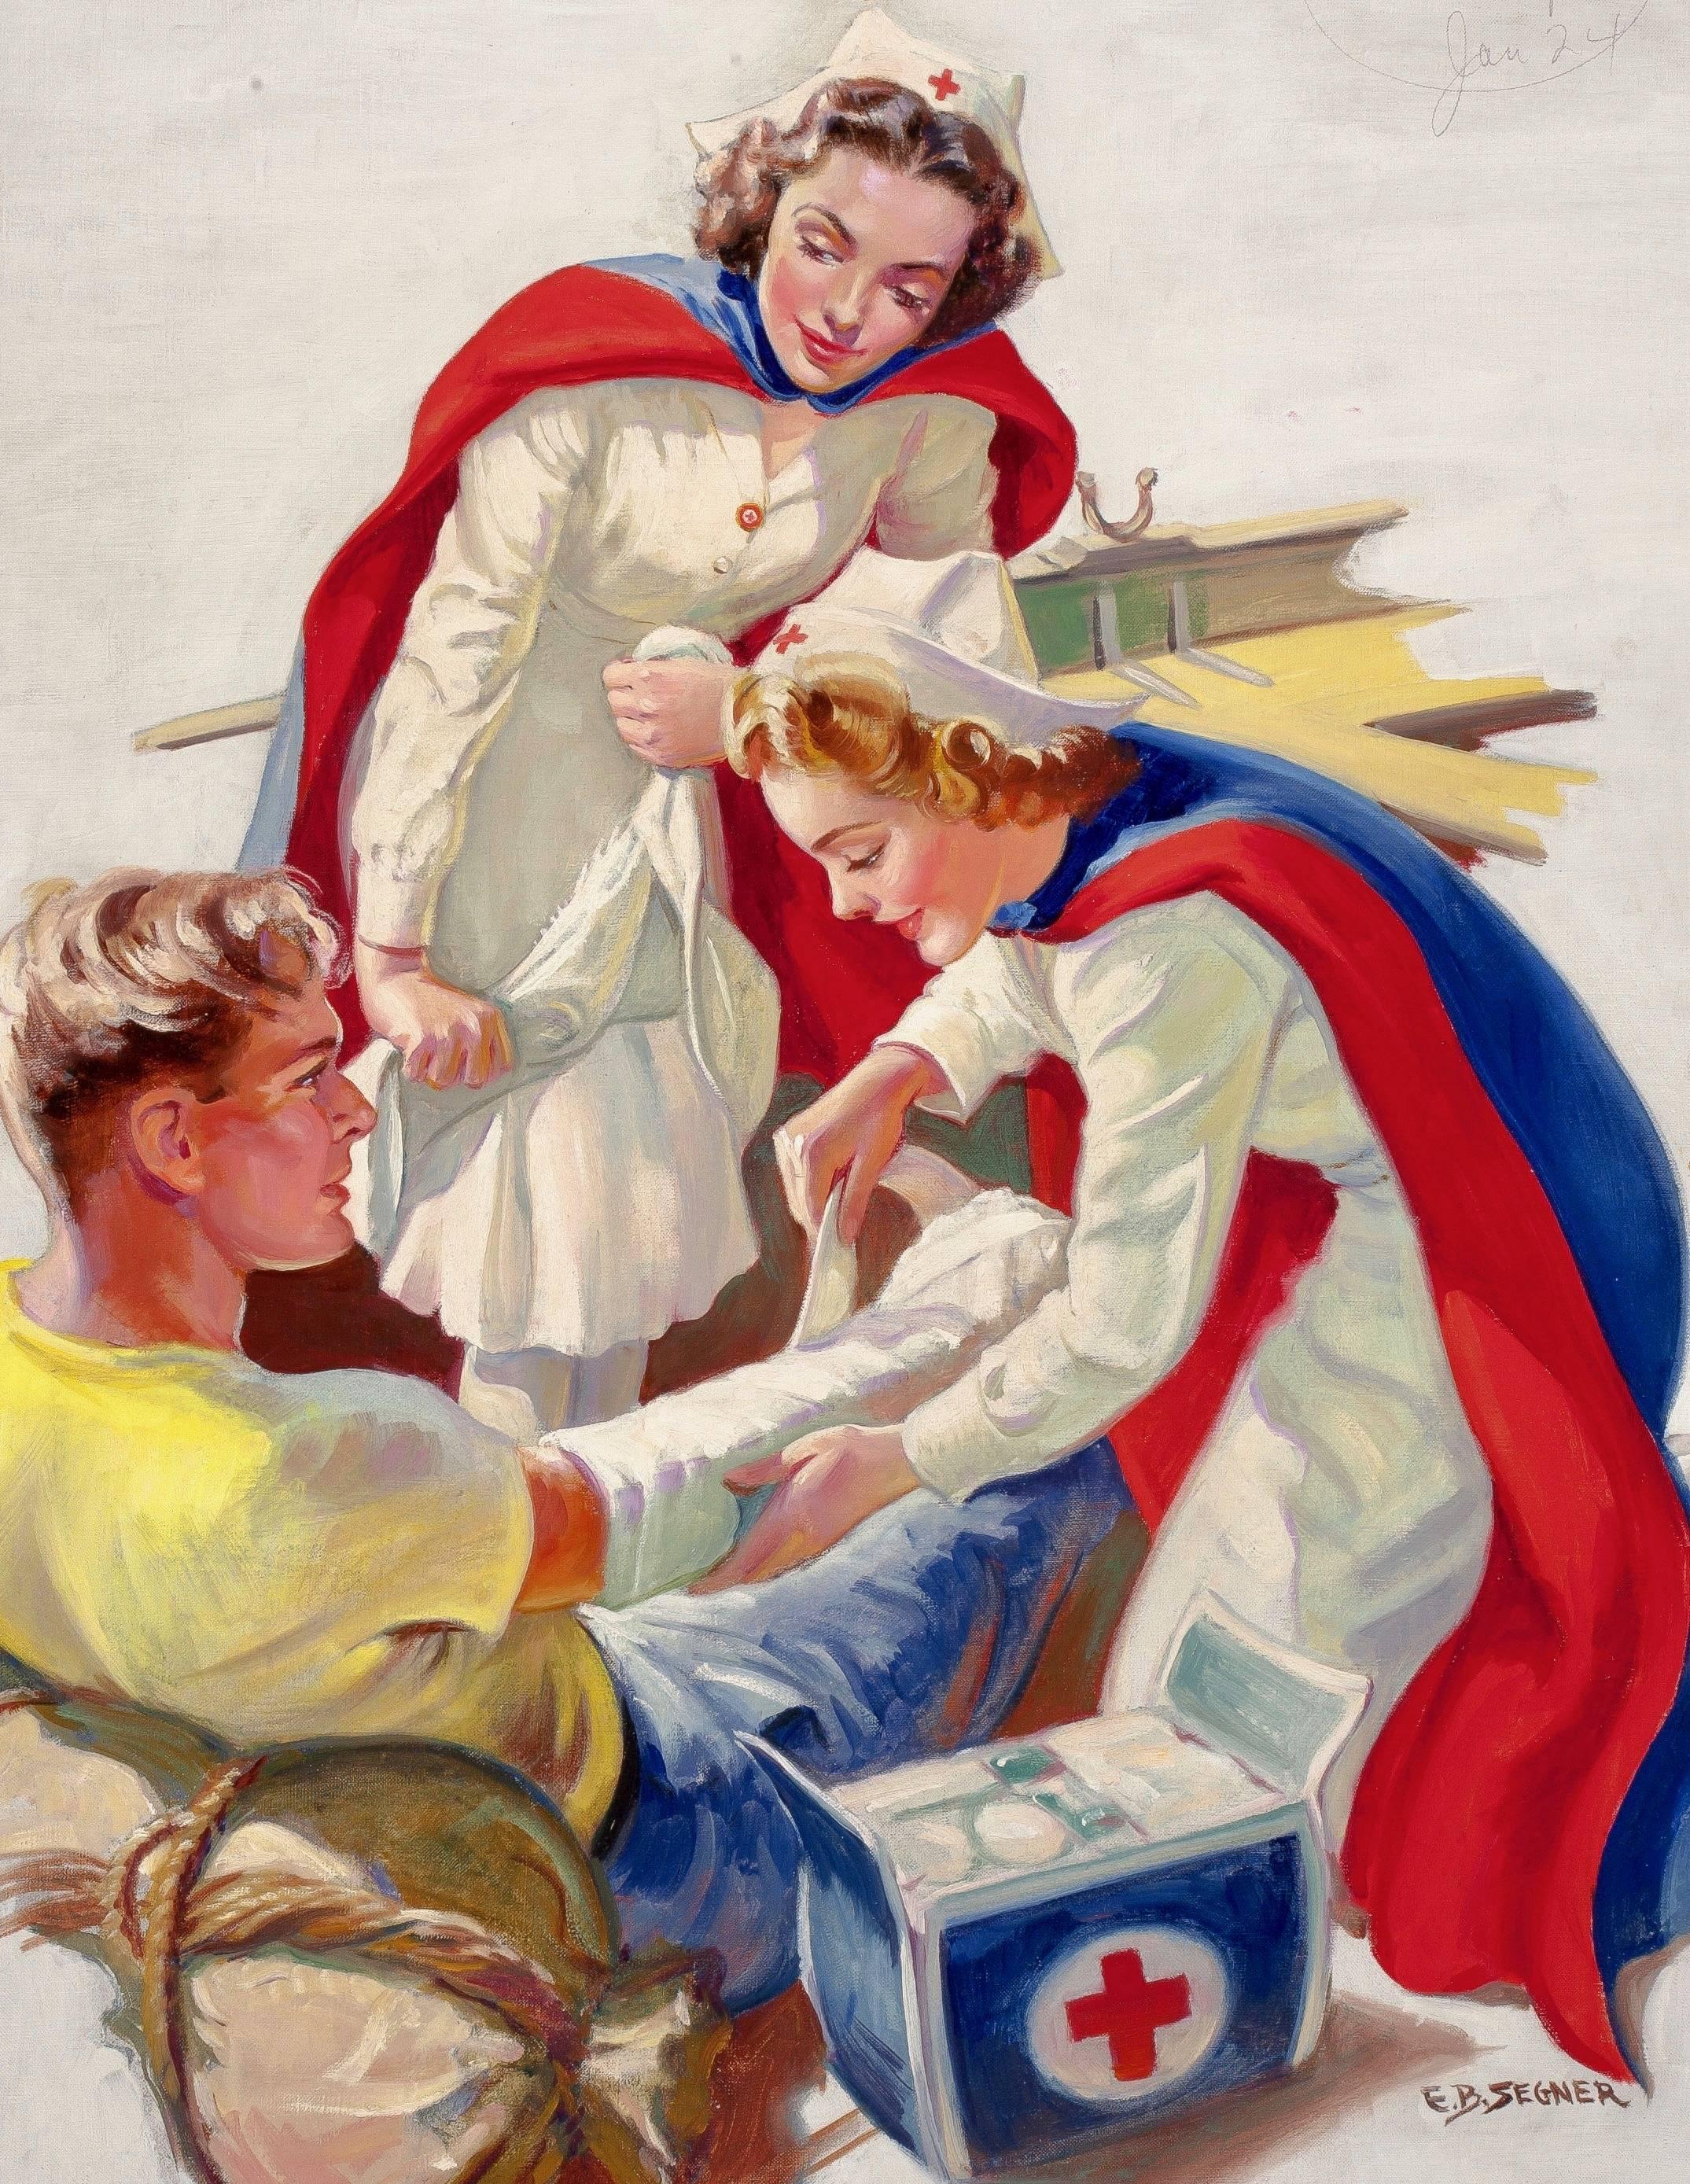 Ellen Barbara Segner Figurative Painting - Helping the Wounded, Probable Red Cross Advertisement